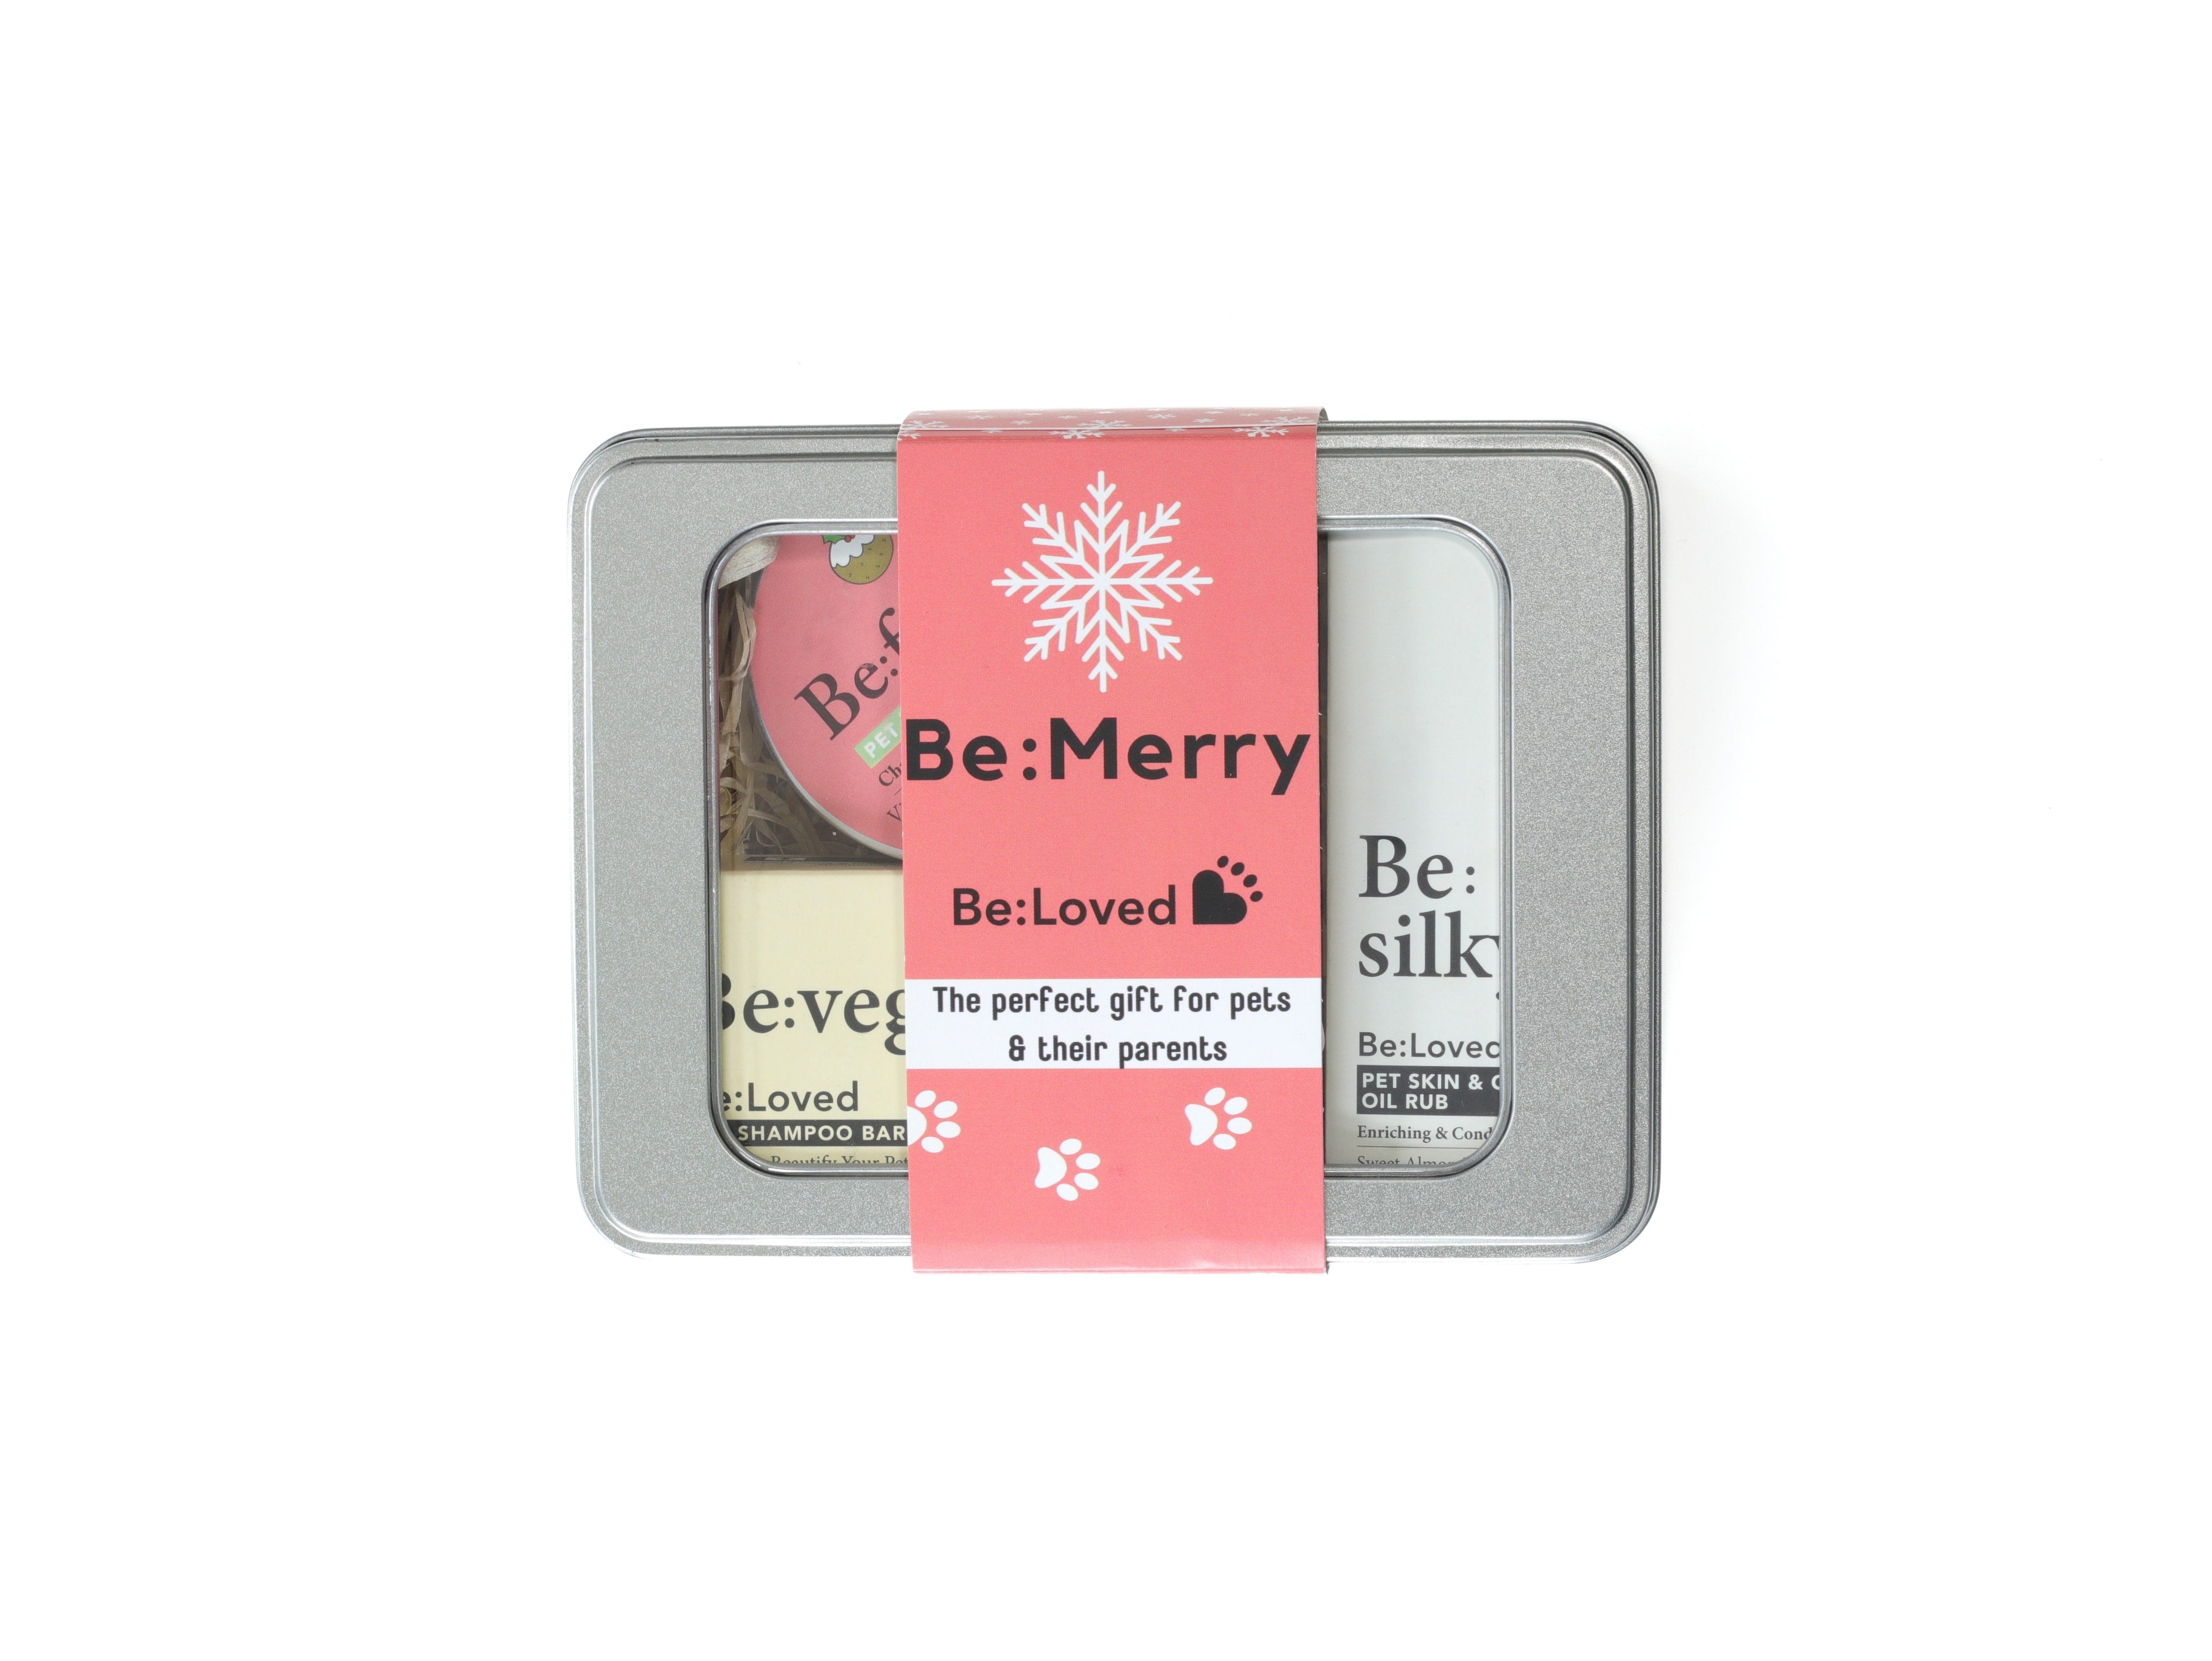 Be:Merry - A festive gift packed full of goodies for pets & their parents.